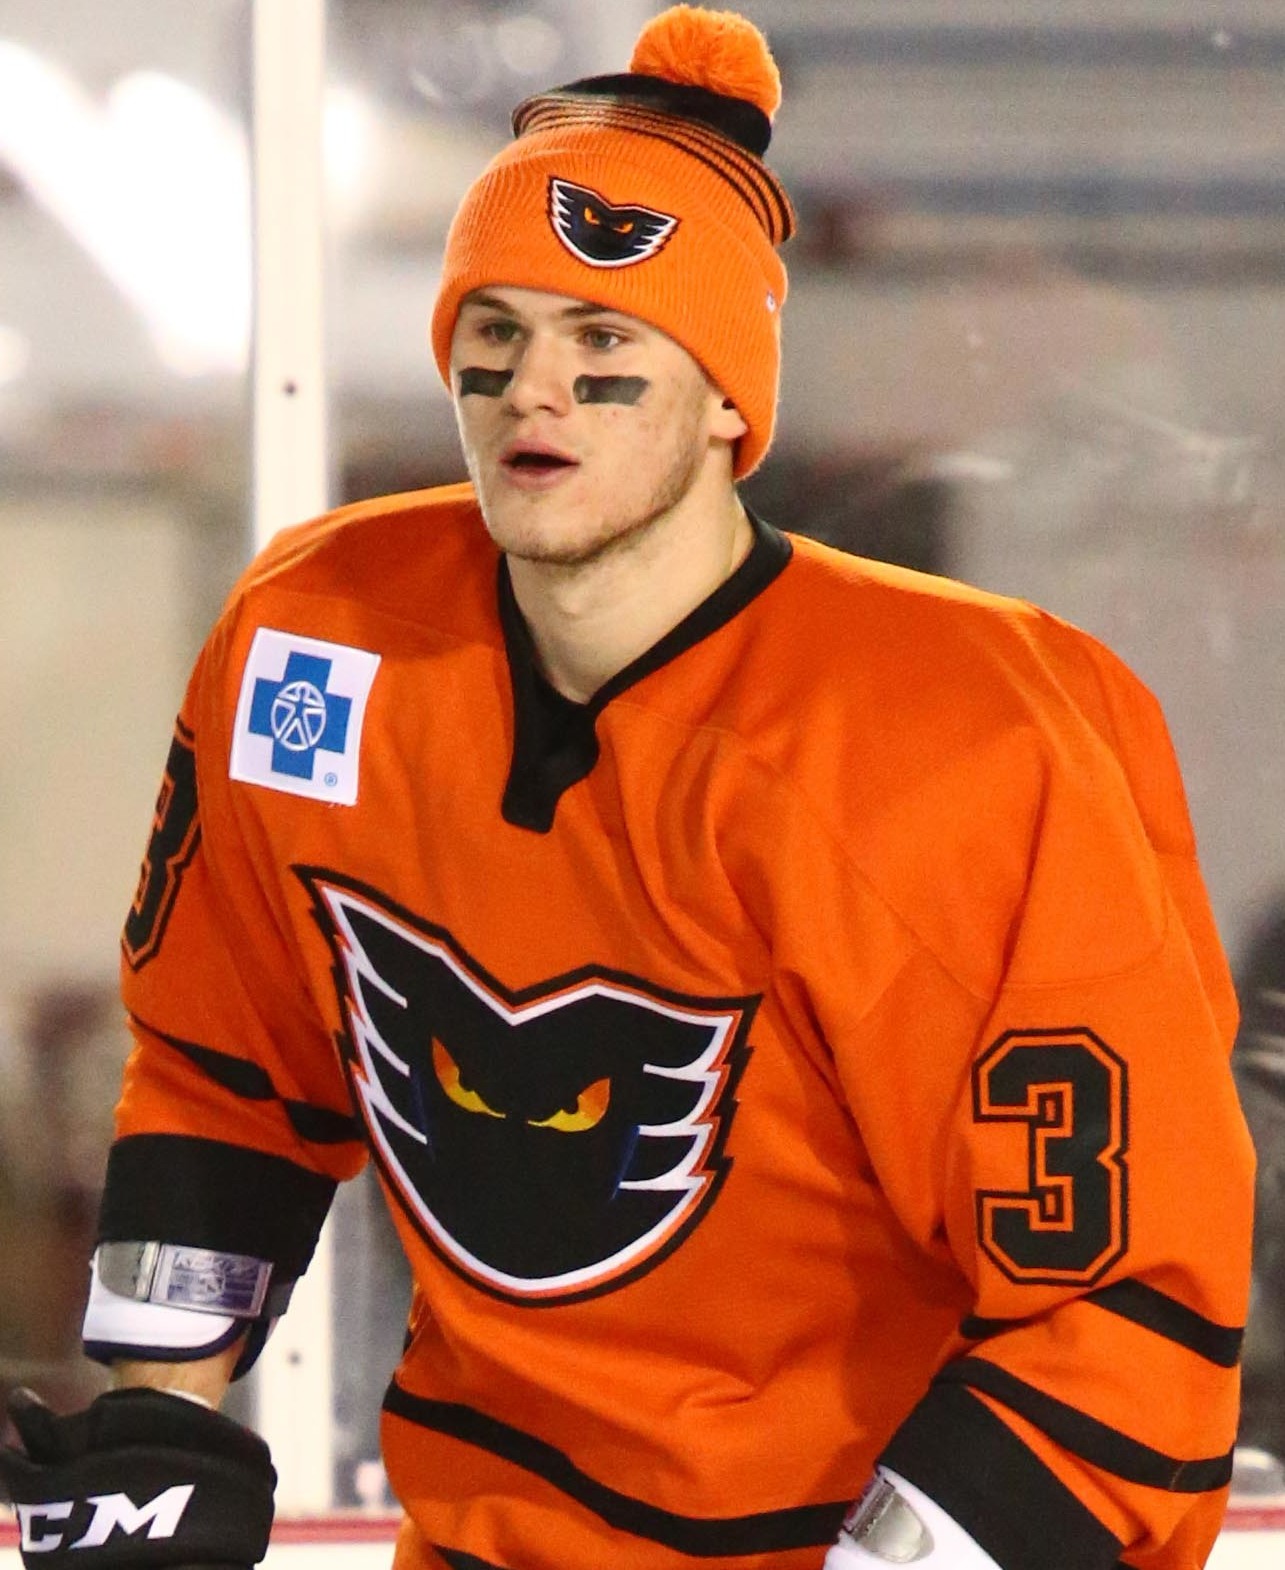 Morin with the [[Lehigh Valley Phantoms]] in 2018